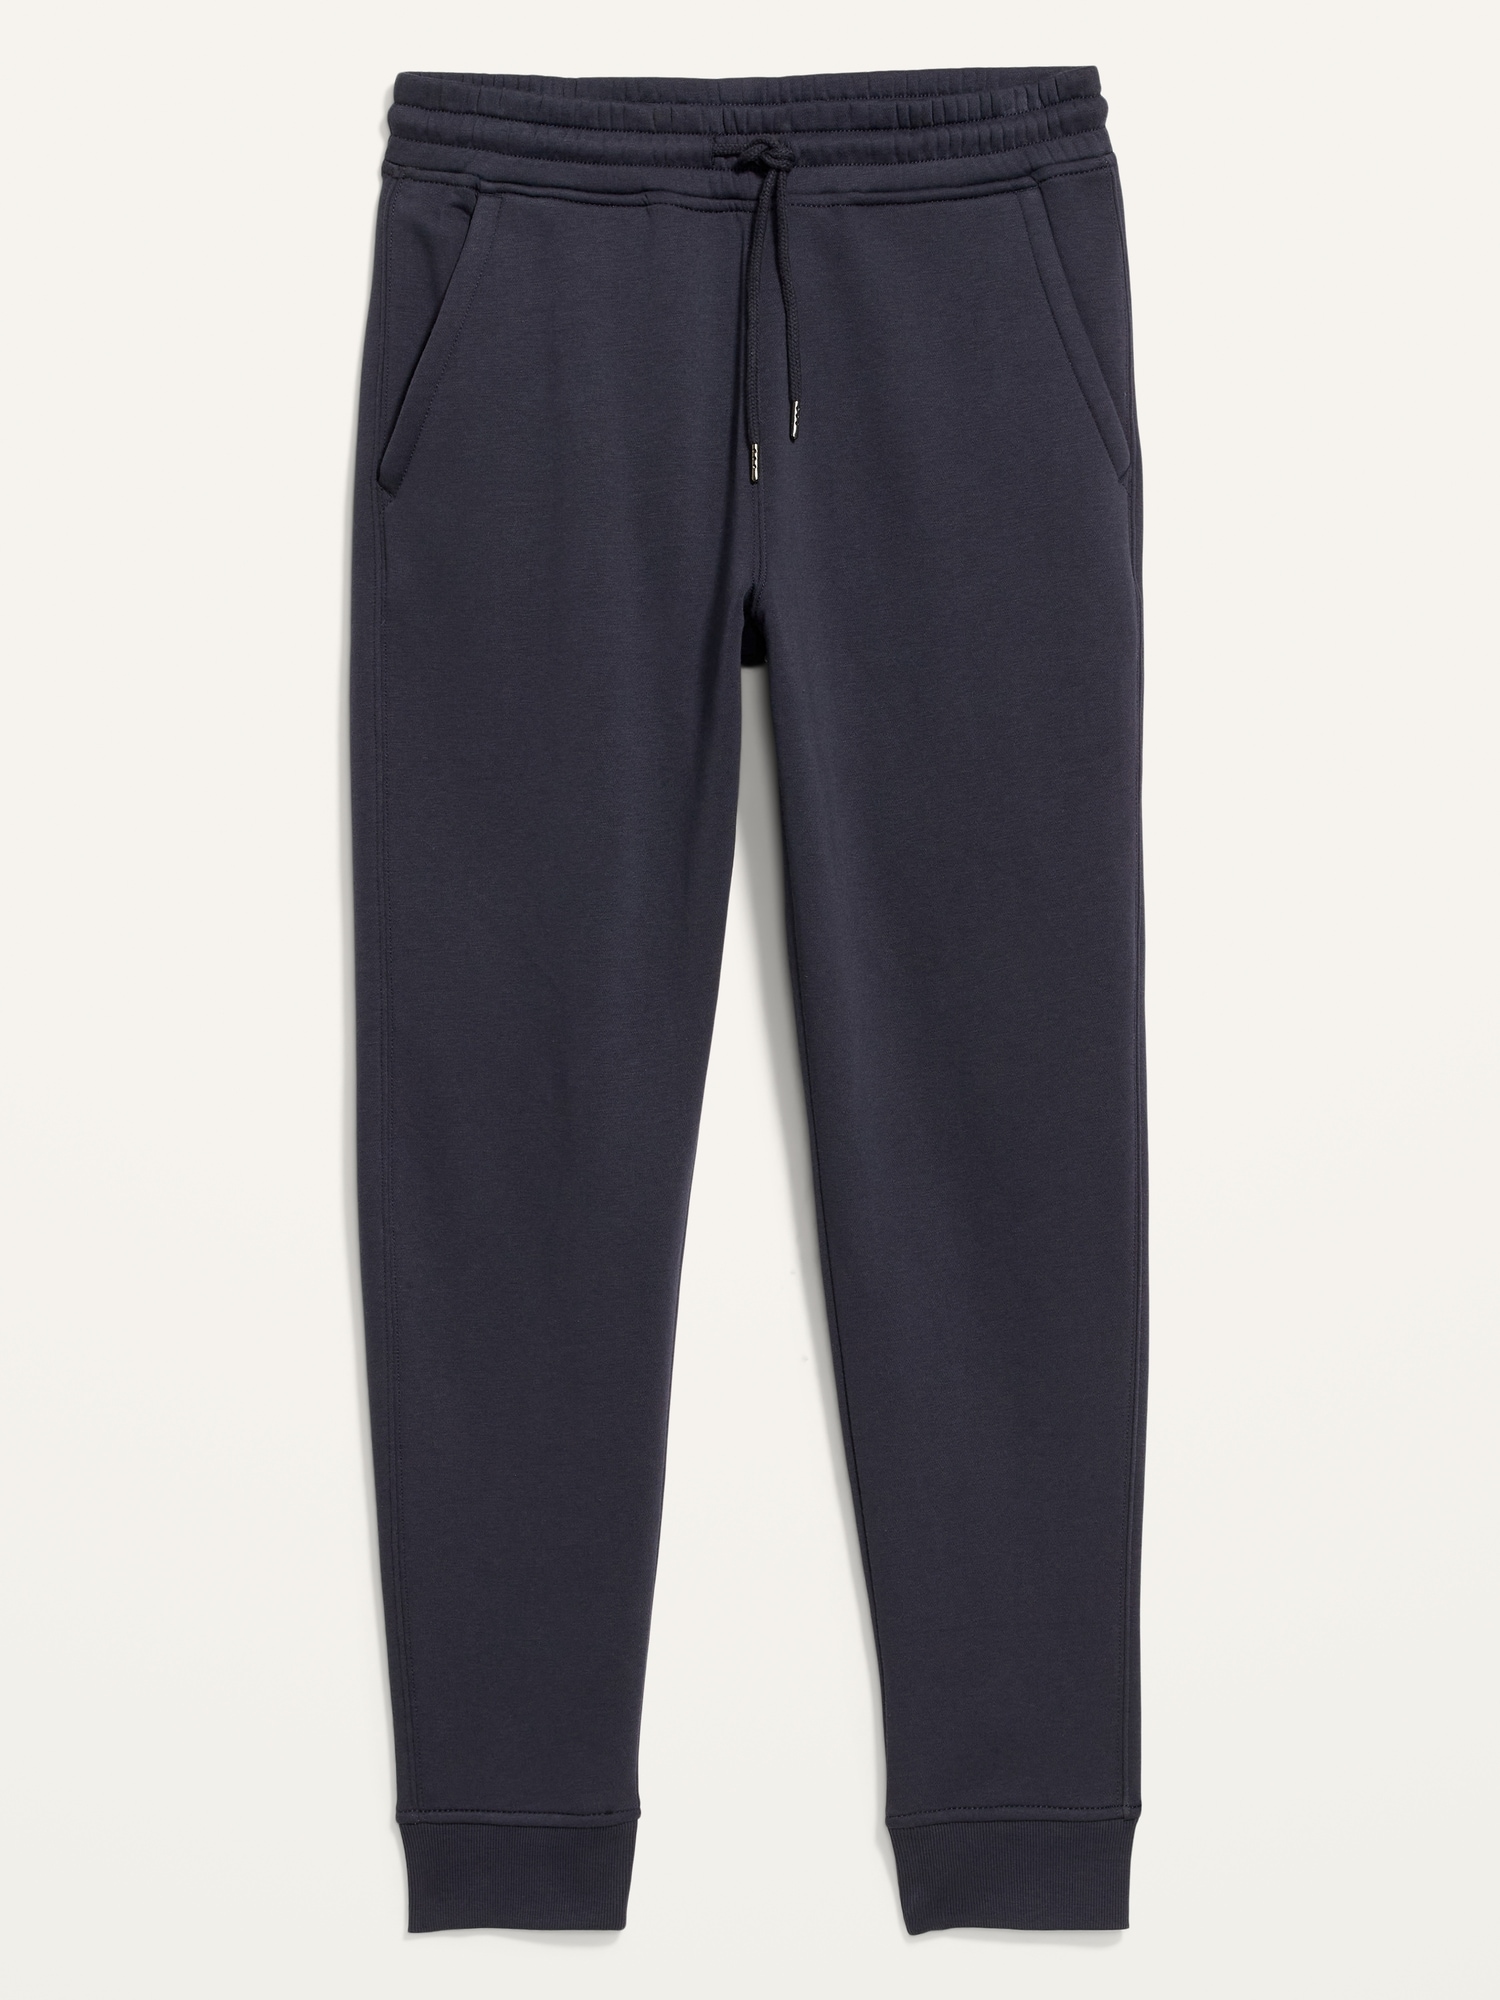 Tapered Straight Sweatpants for Men